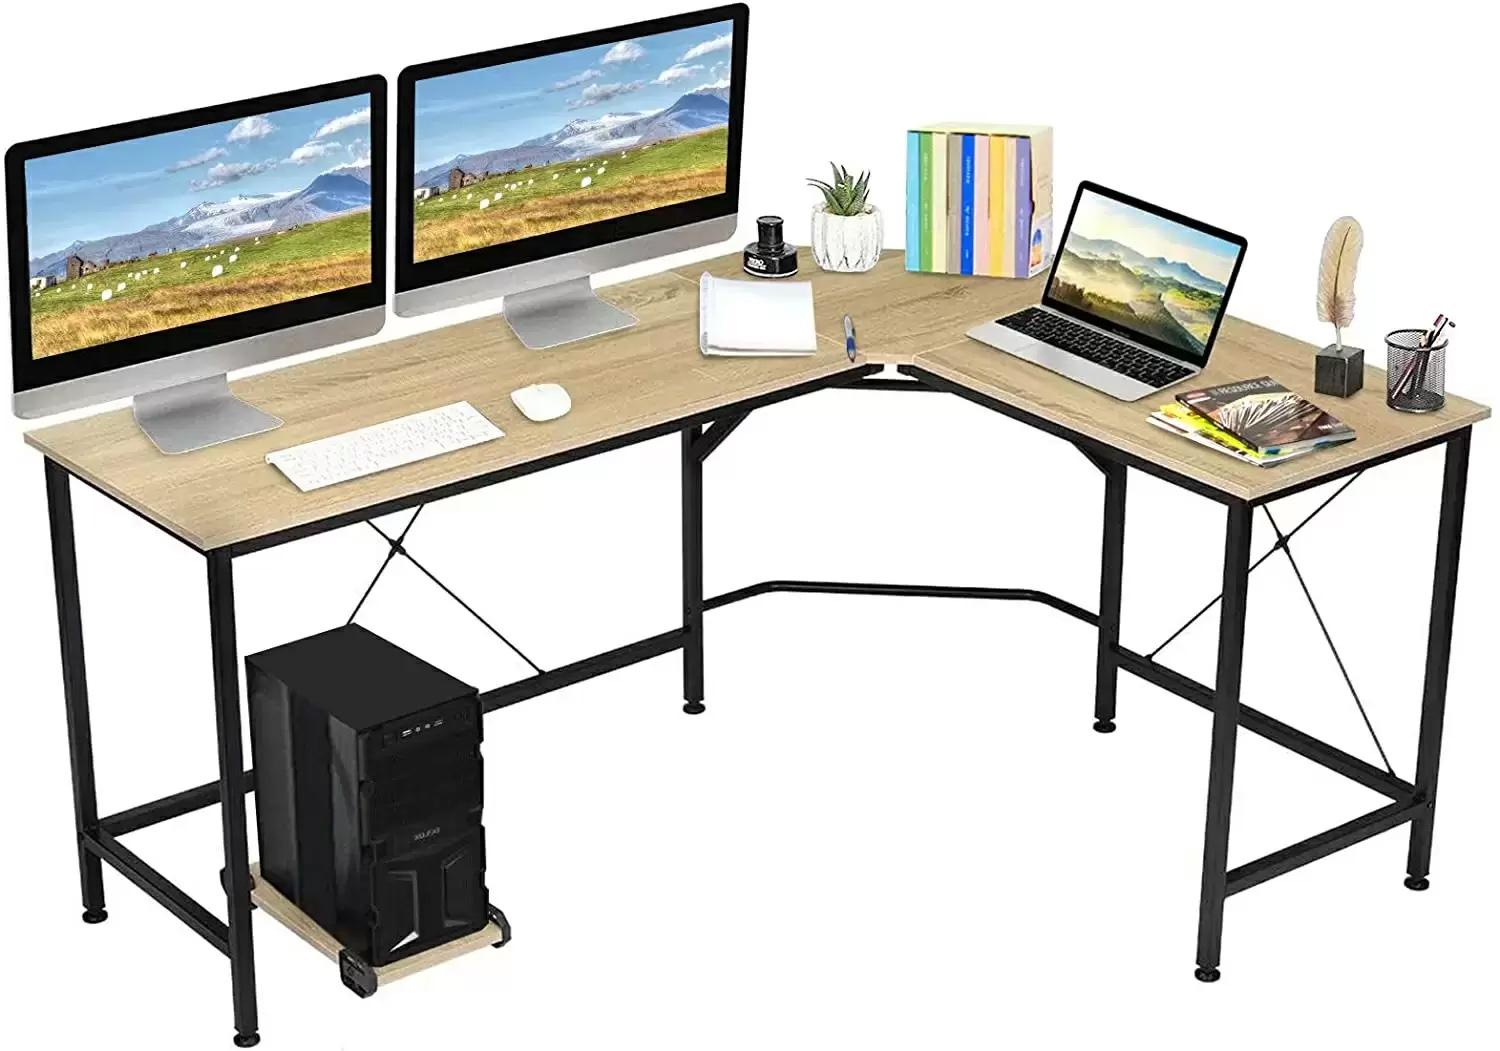 65in Kingso L-Shaped Computer Desk with Computer Stand for $69.99 Shipped